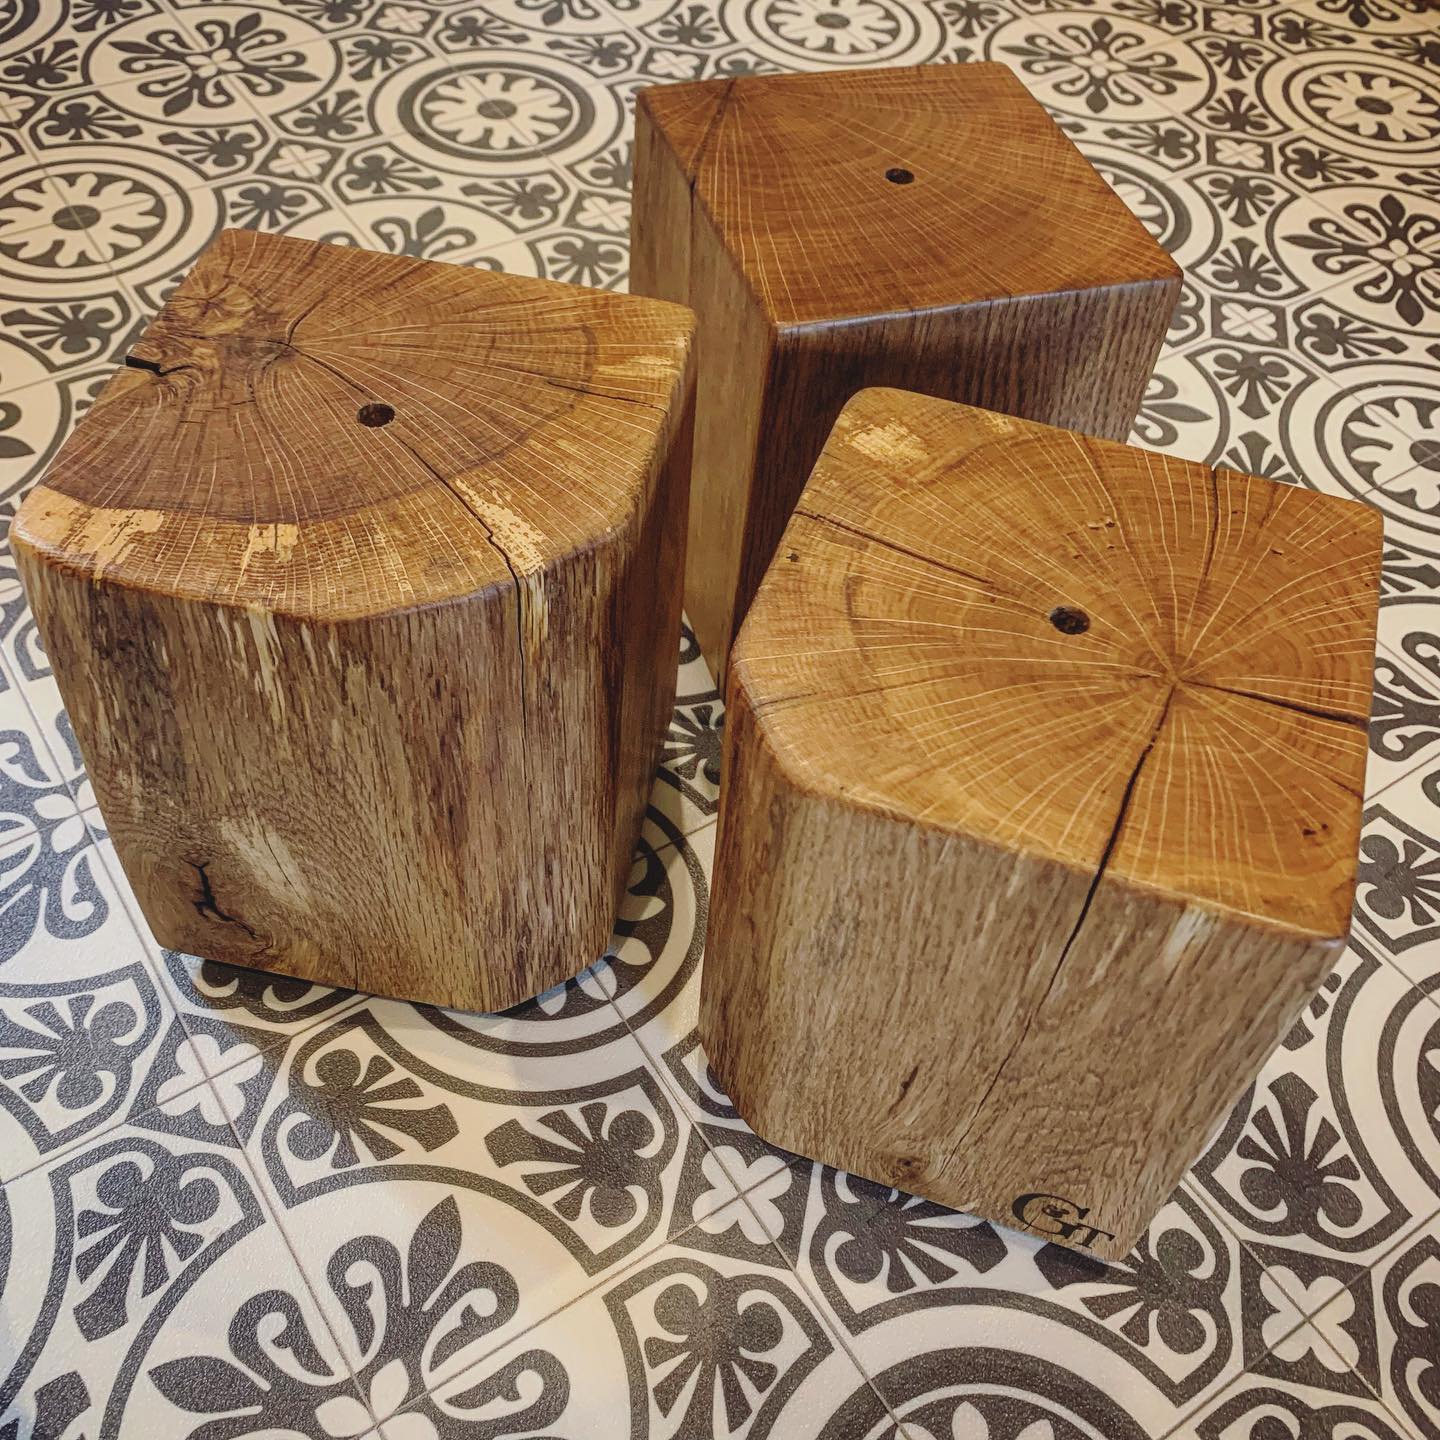 Some lovely pieces of oak ready to be wired up as lamps  Find a small range of our lamps on our website or find us next at @thecraftandflea on Sunday February 27th at Bristol Paintworks.